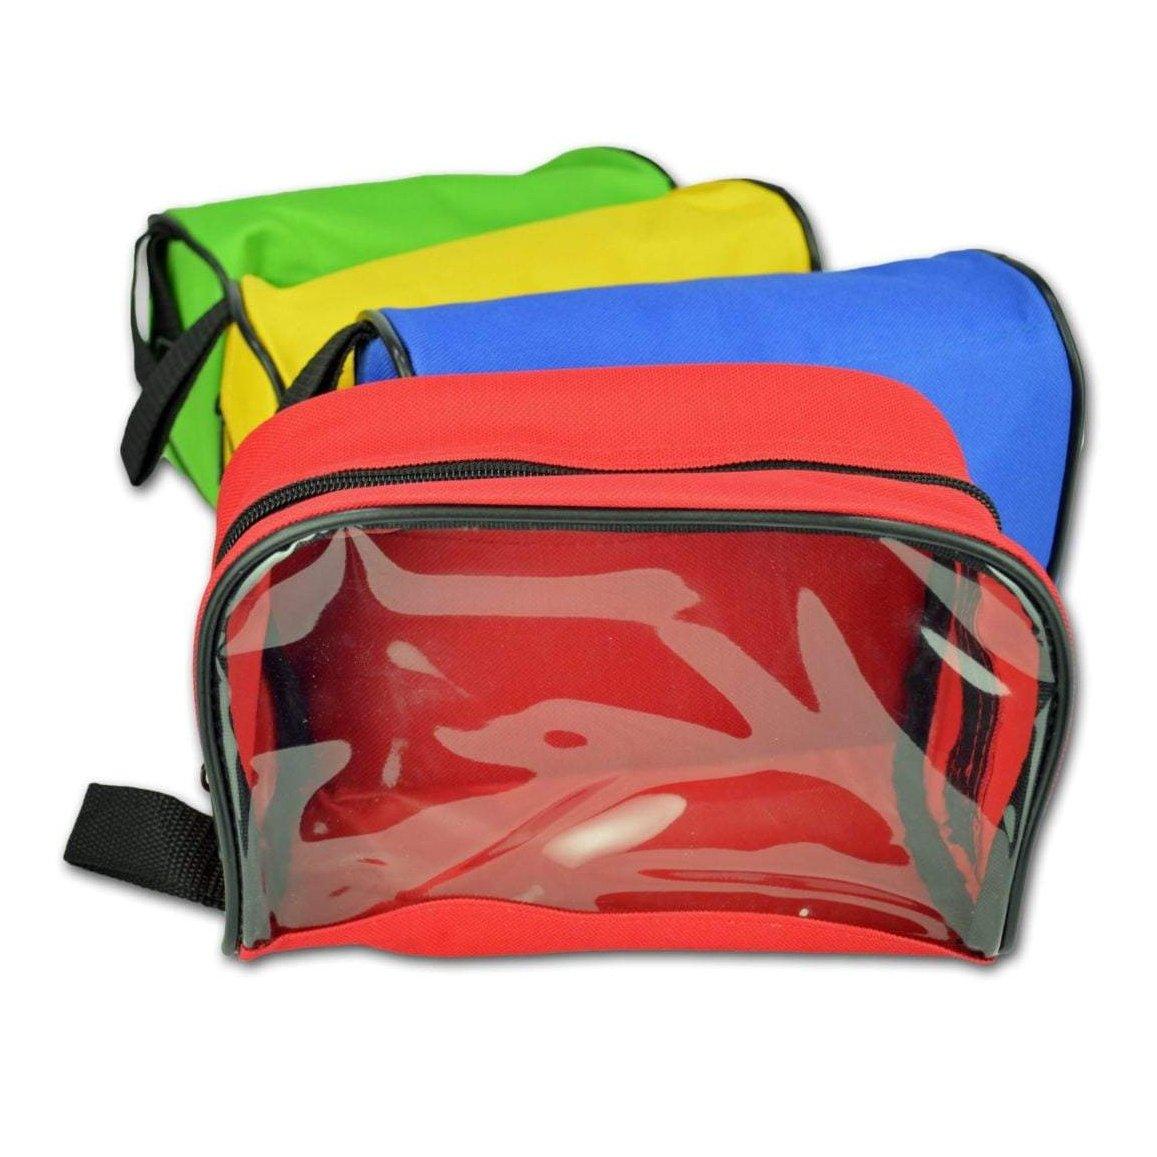 Backpack Accessory Pouch Kit - 4 Color - Vendor